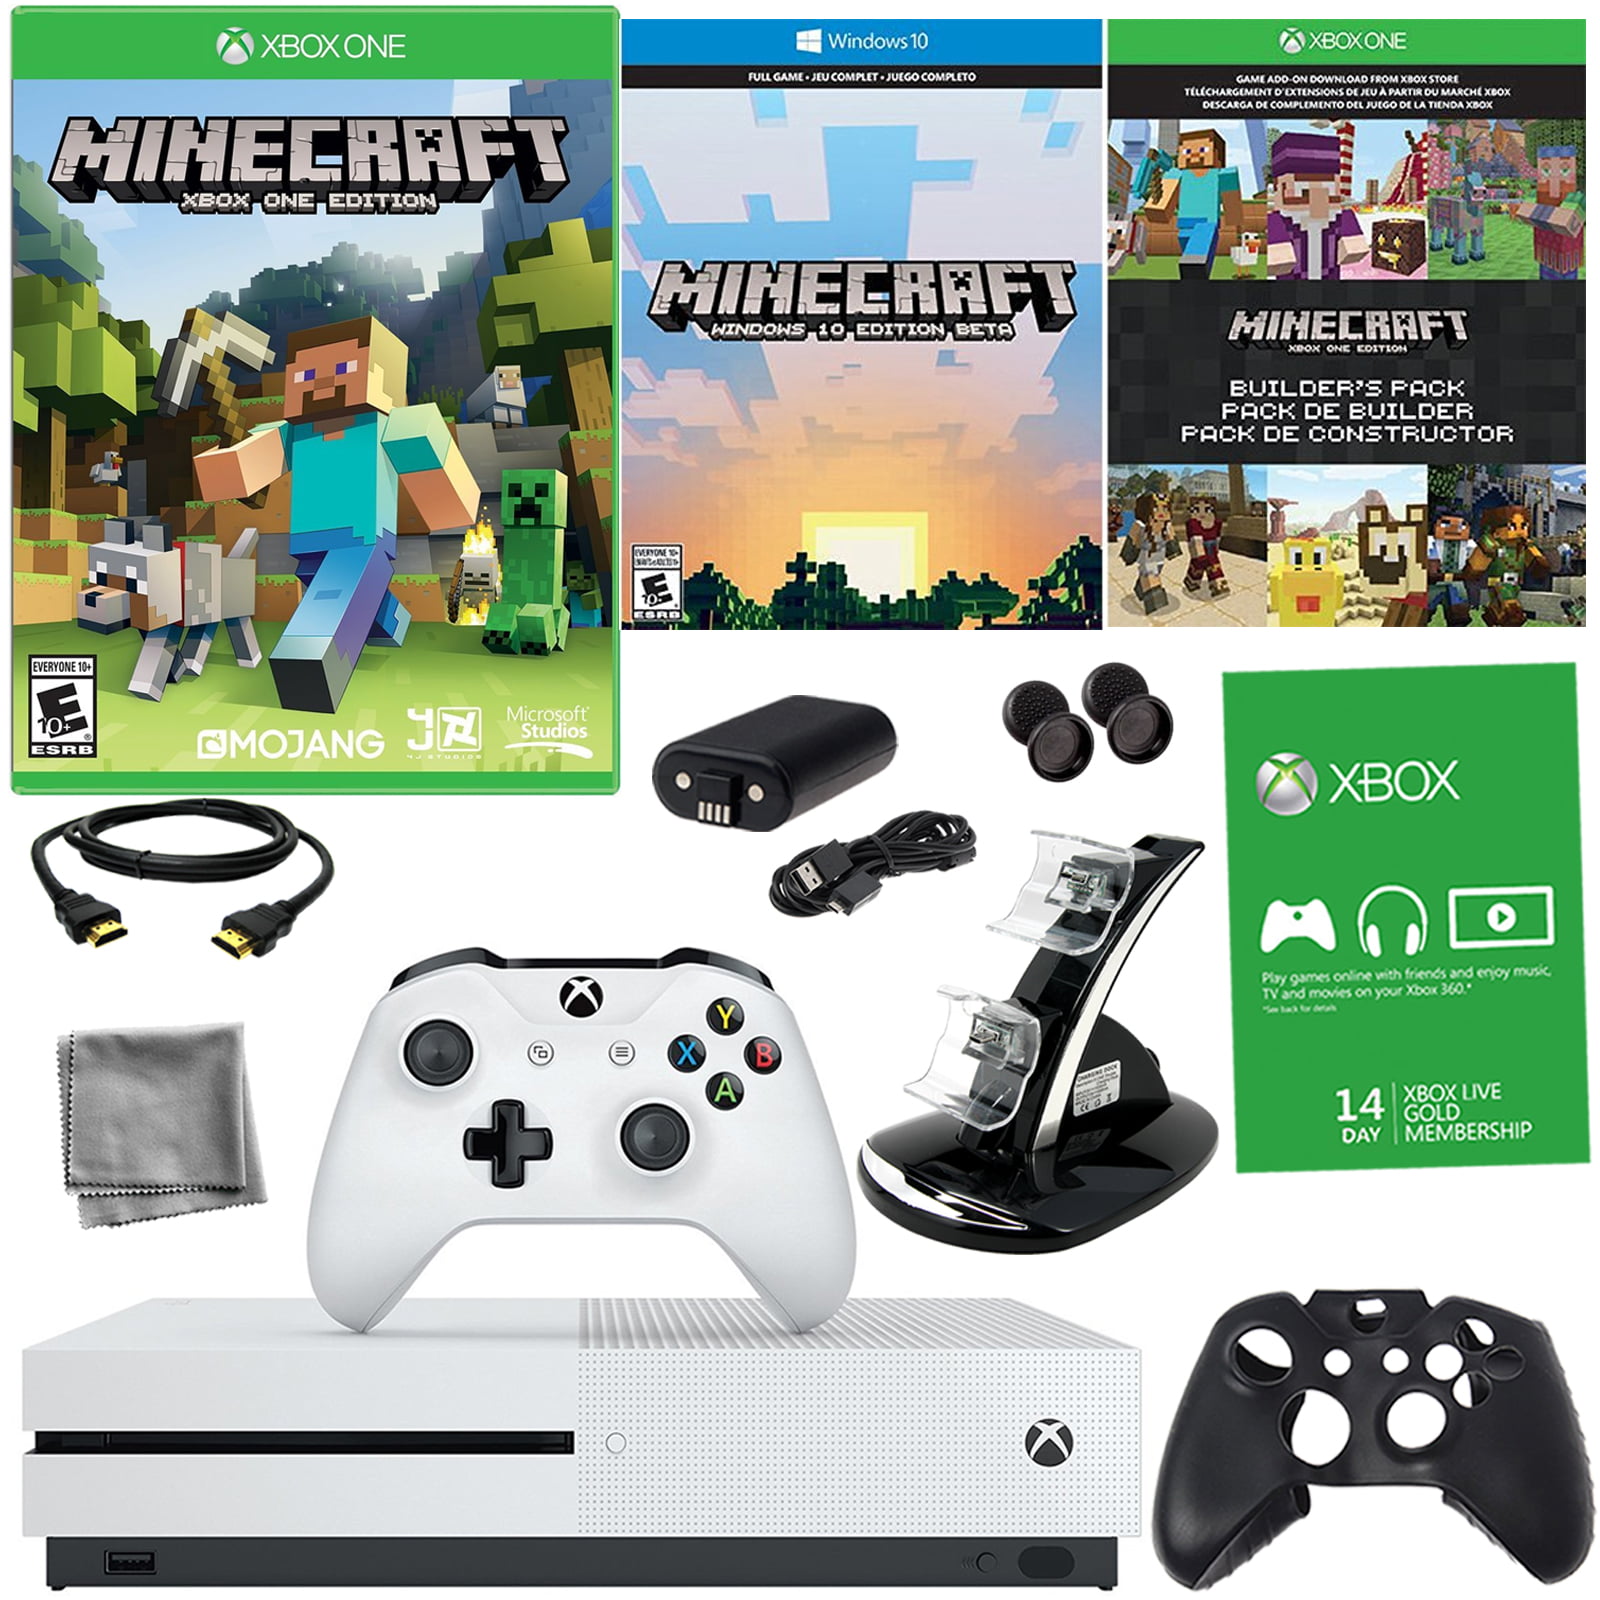  Xbox One S 500GB Console - Minecraft Bundle [Discontinued] :  Video Games